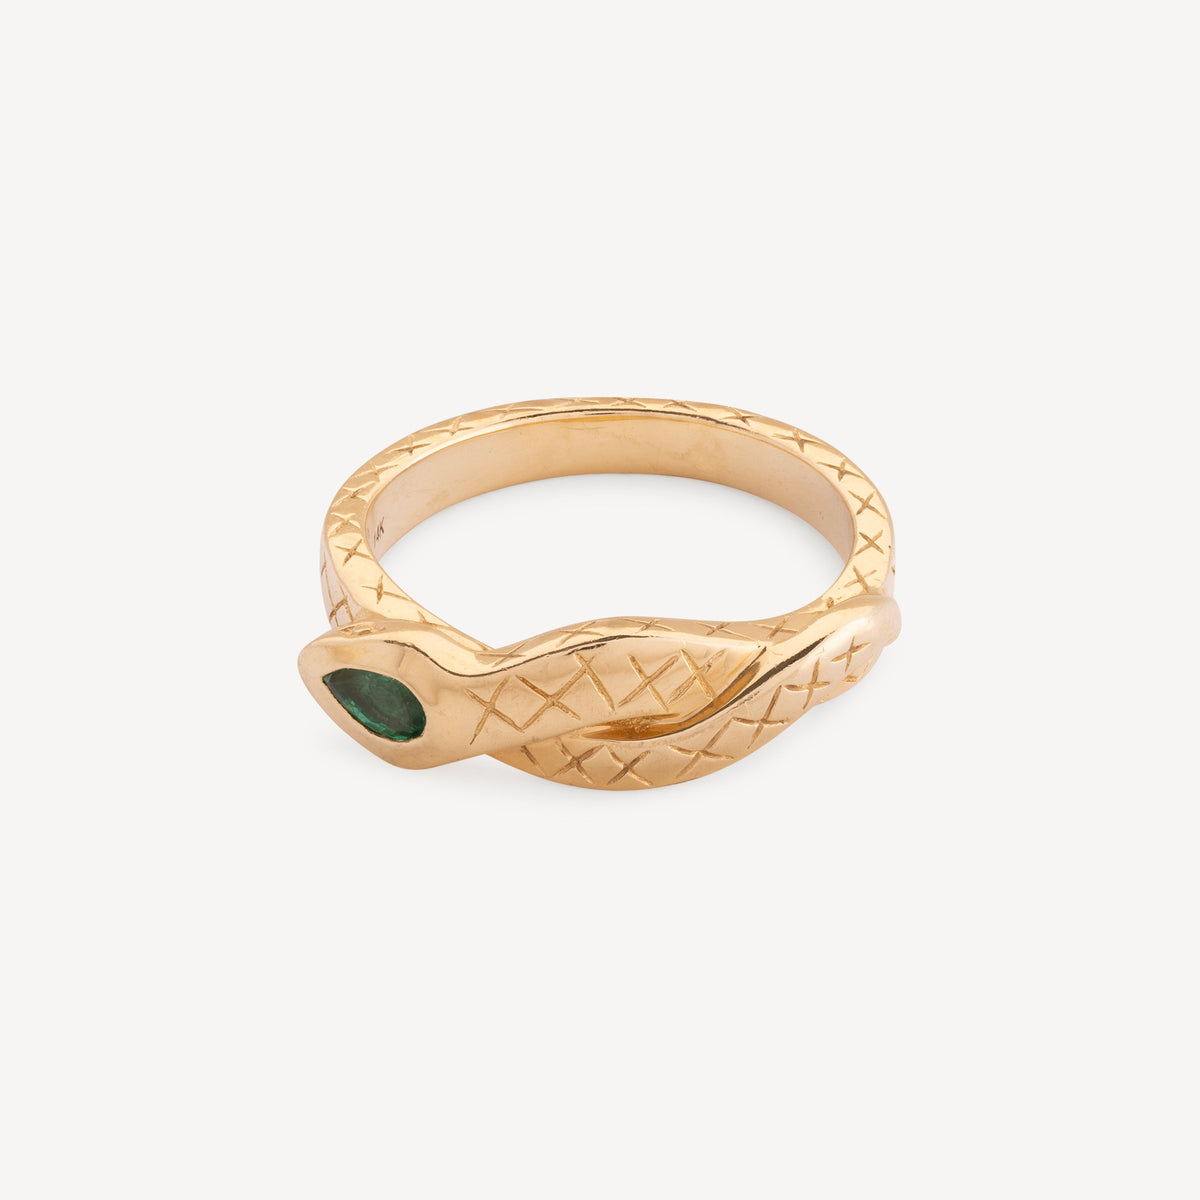 Sophia Serpent Ring with Pear Emerald